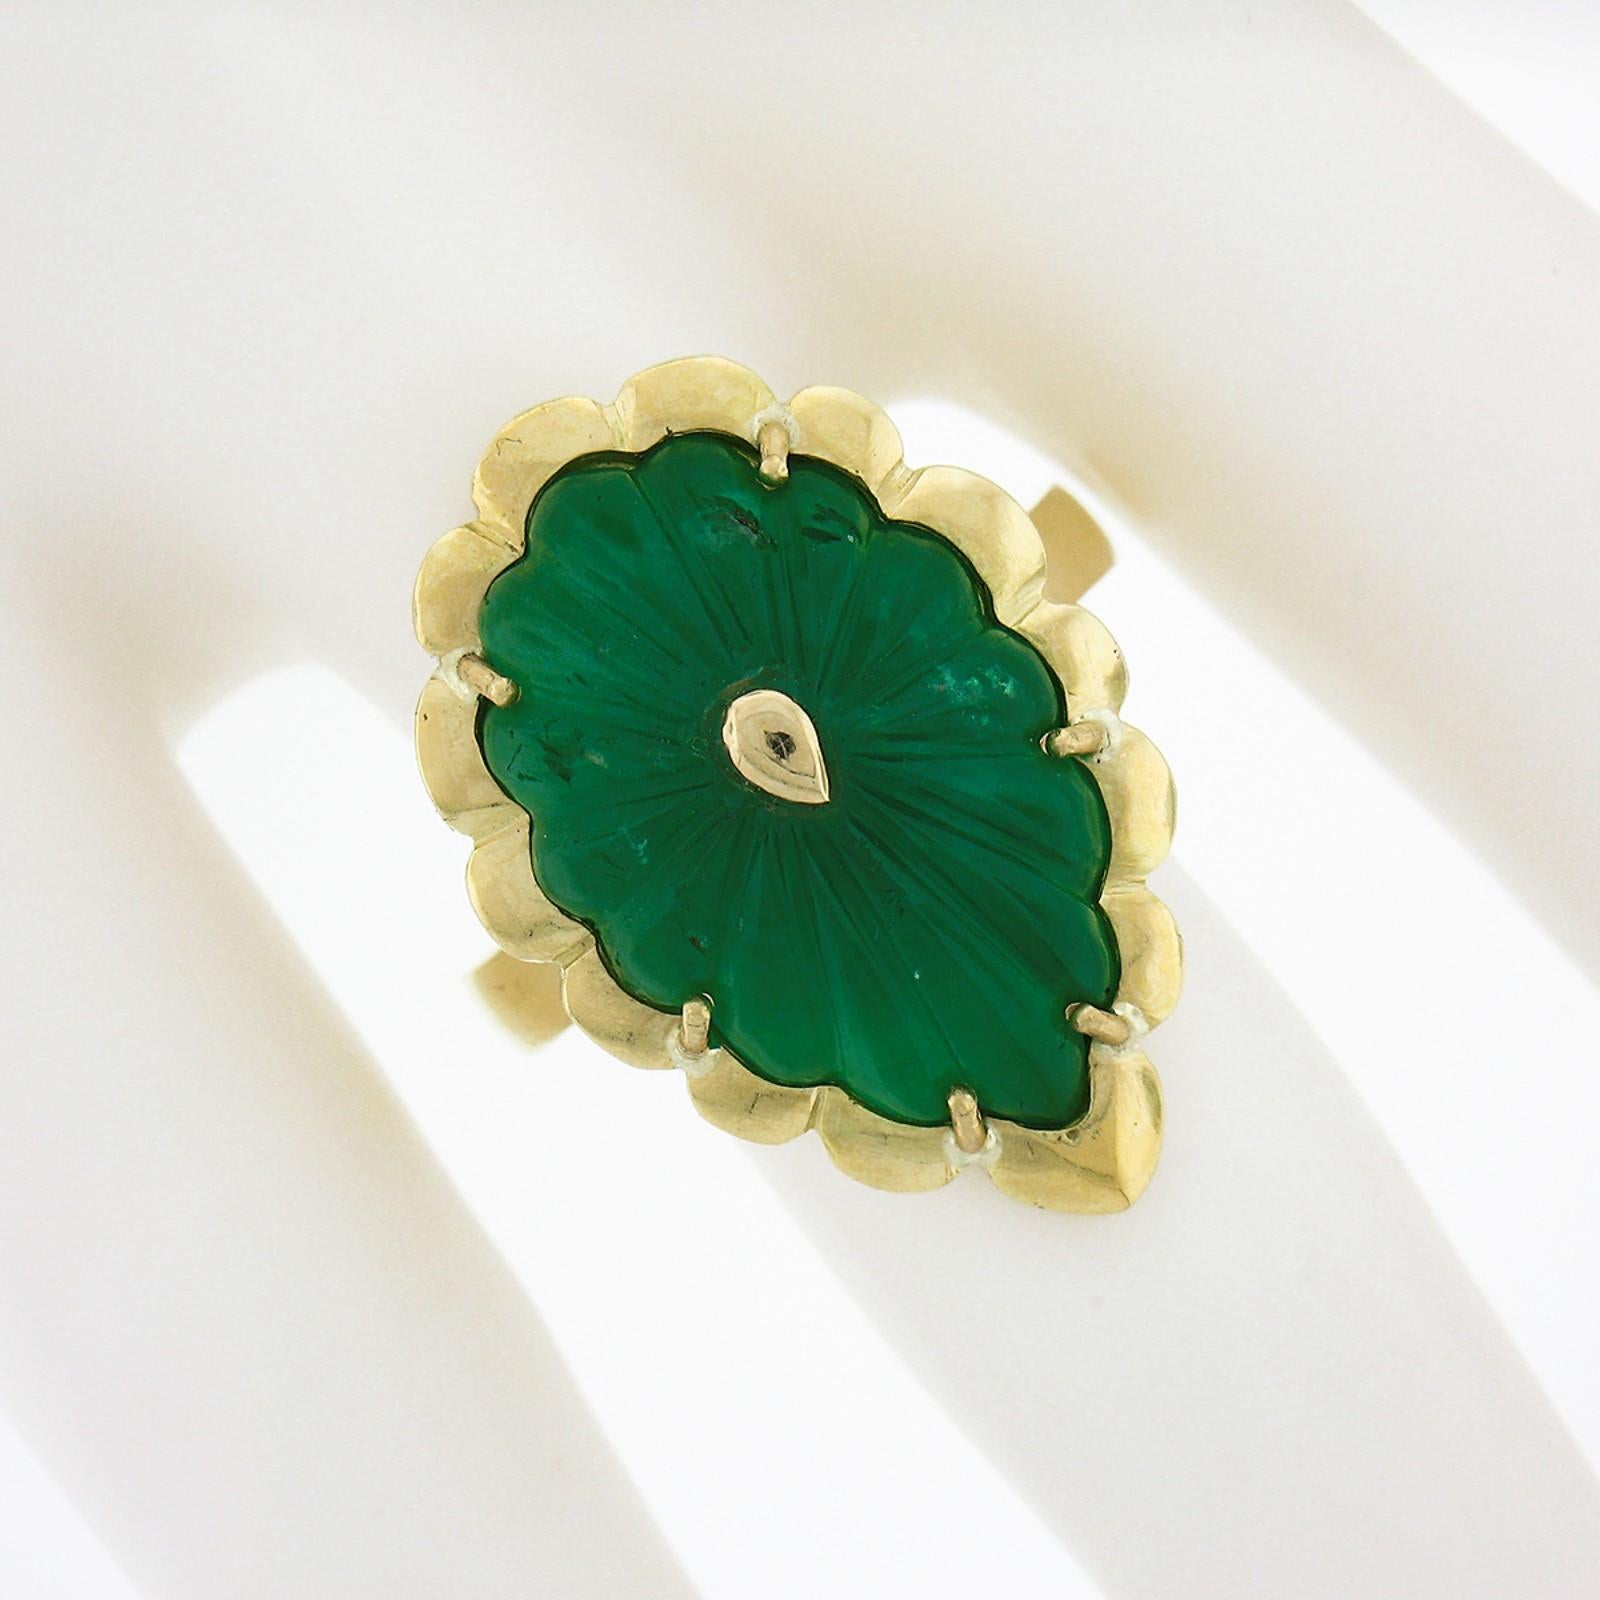 New Handmade 18K Green Gold 9ct GIA Carved Green Emerald Statement Cocktail Ring In New Condition For Sale In Montclair, NJ